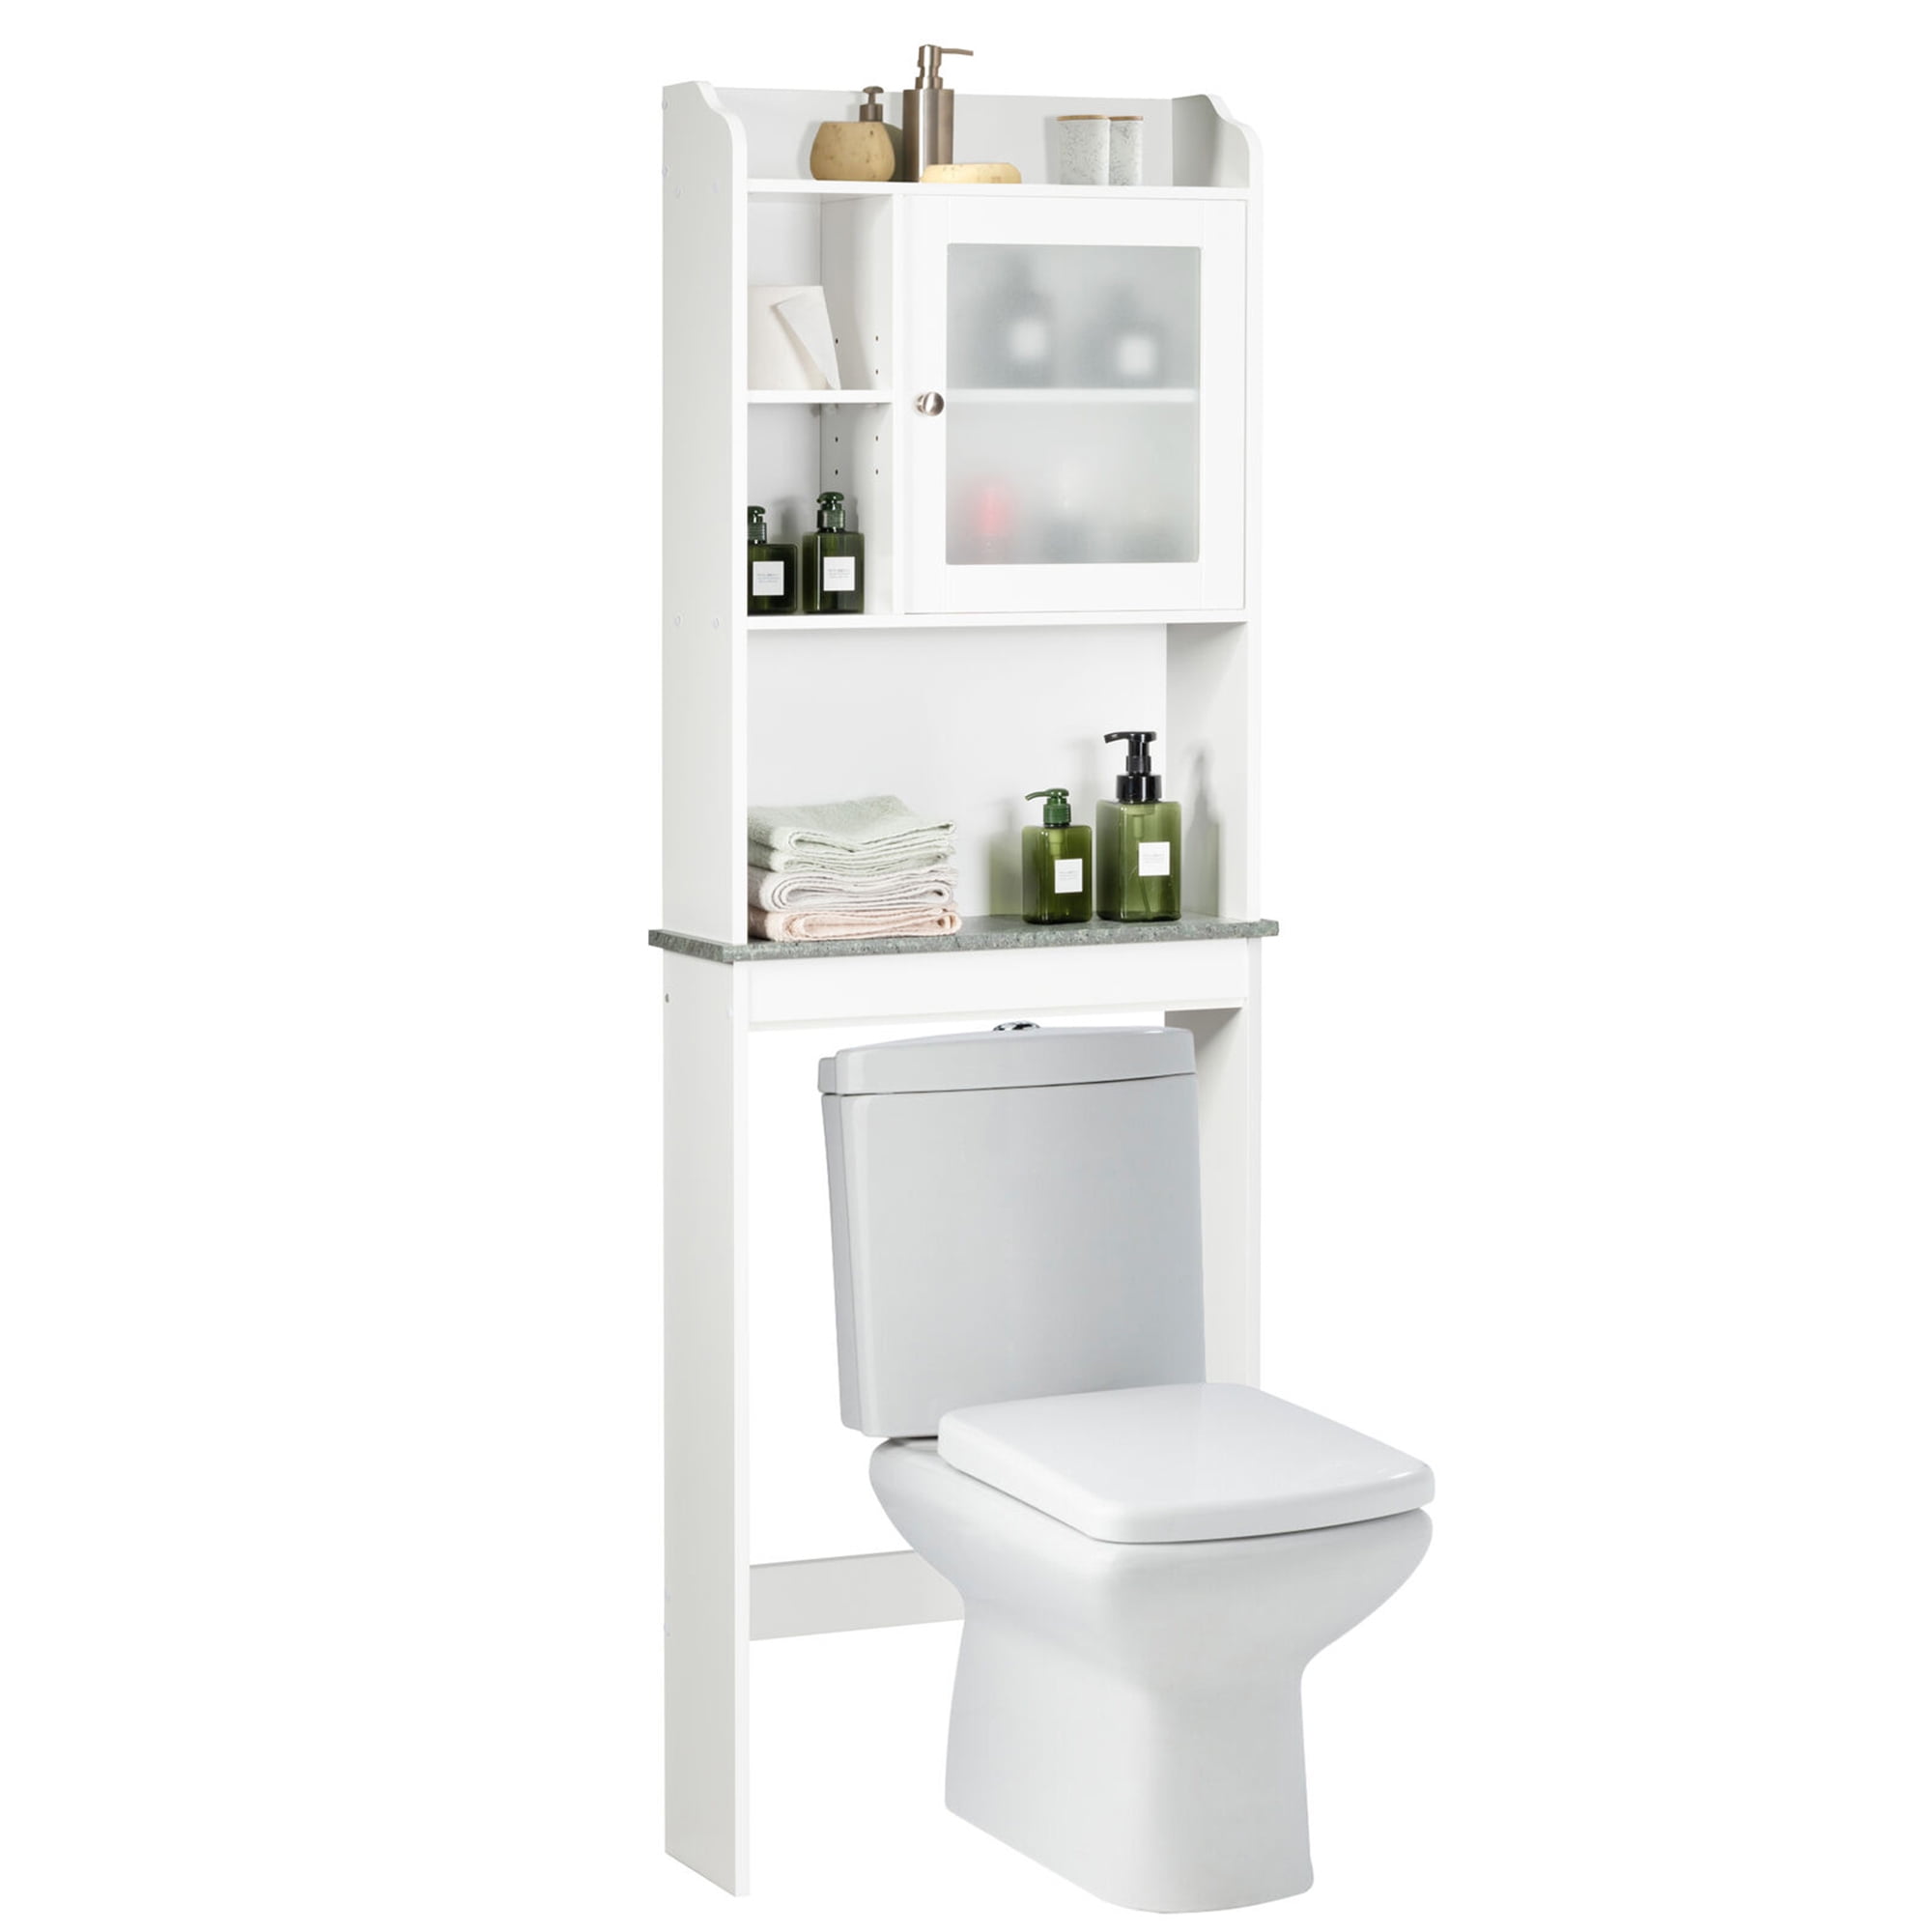 Gymax Over The Toilet Bath Cabinet, Bathroom Over The Toilet Cabinets Canada